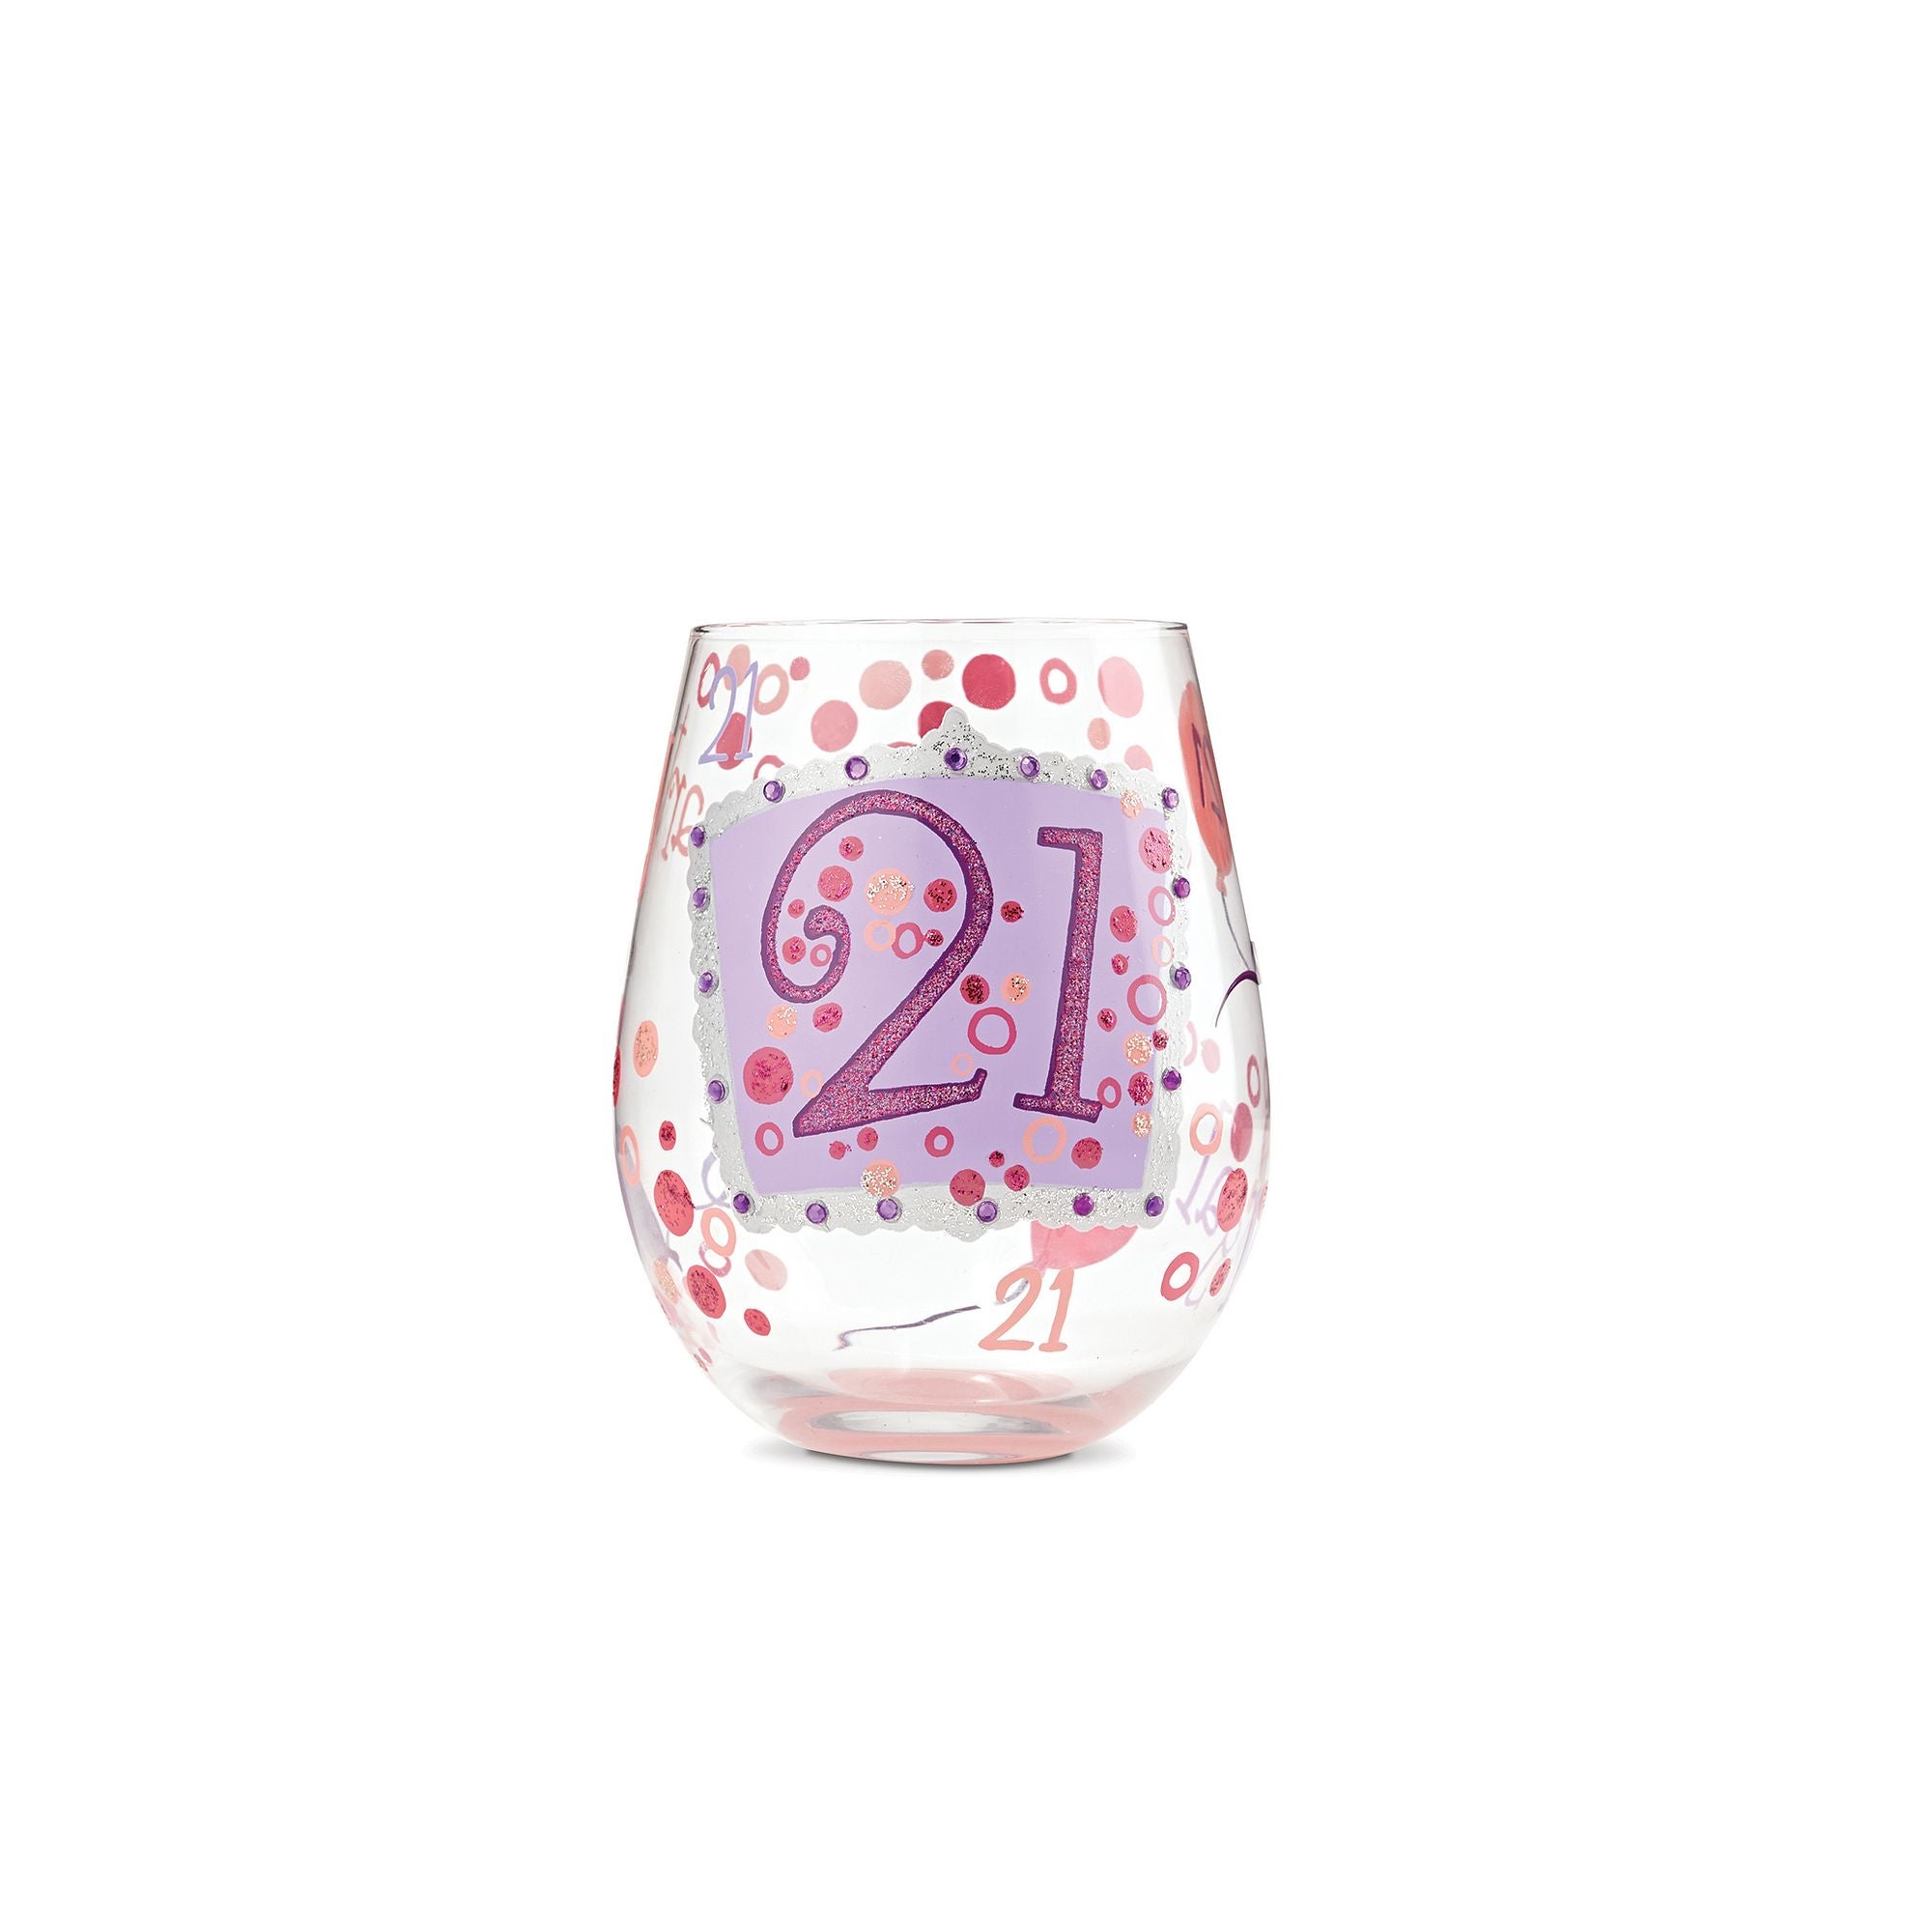 Tabletop Frosted Forest Stemless Wine Glass Lolita Hand Painted 6011247, 1  - Harris Teeter